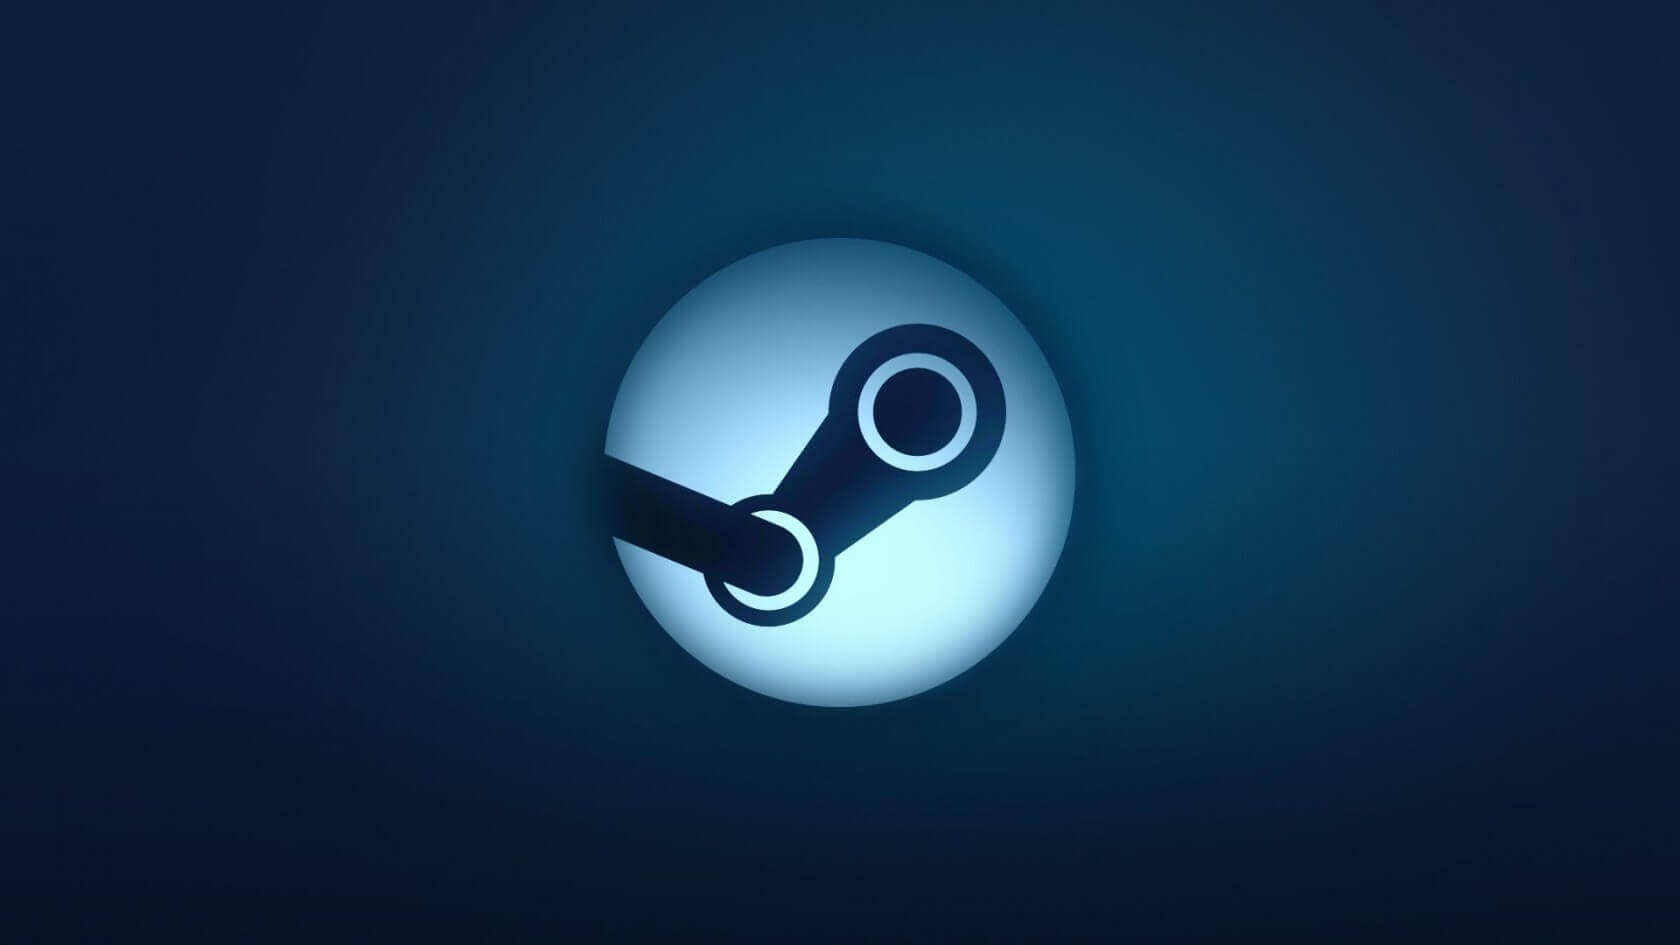 Steam will show EU customers 30-day-low price for games